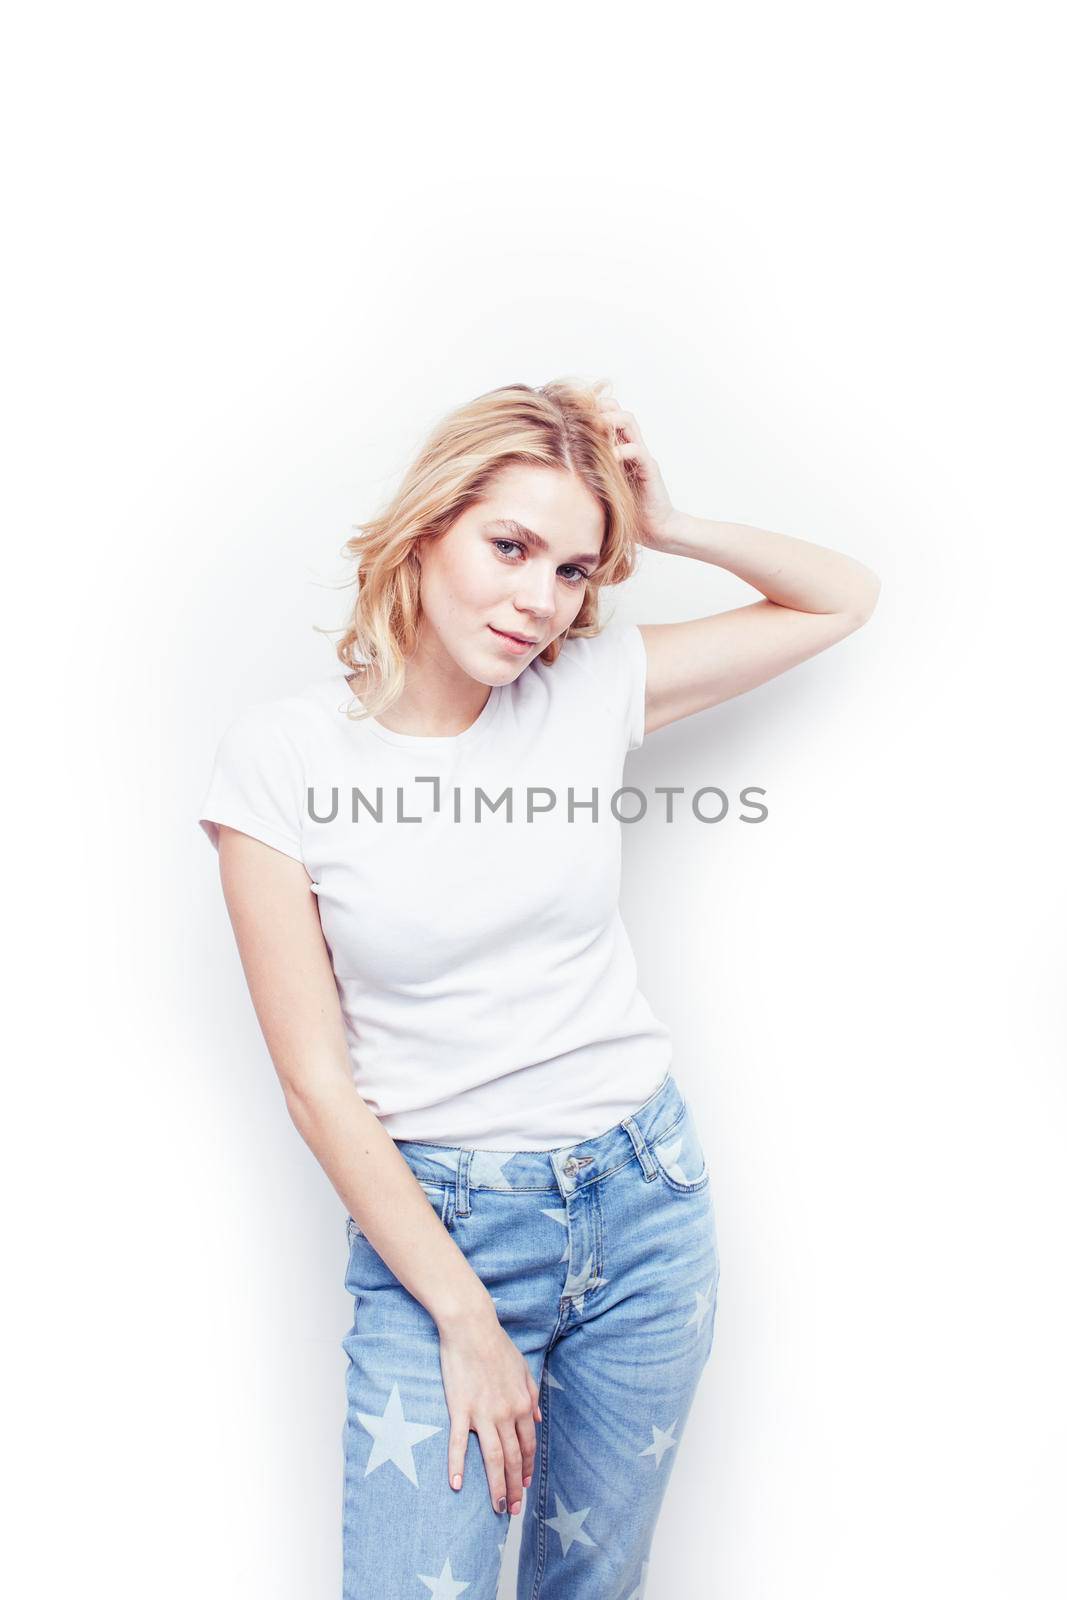 young pretty stylish blond hipster girl posing emotional isolated on white background happy smiling cool smile, lifestyle people concept close up